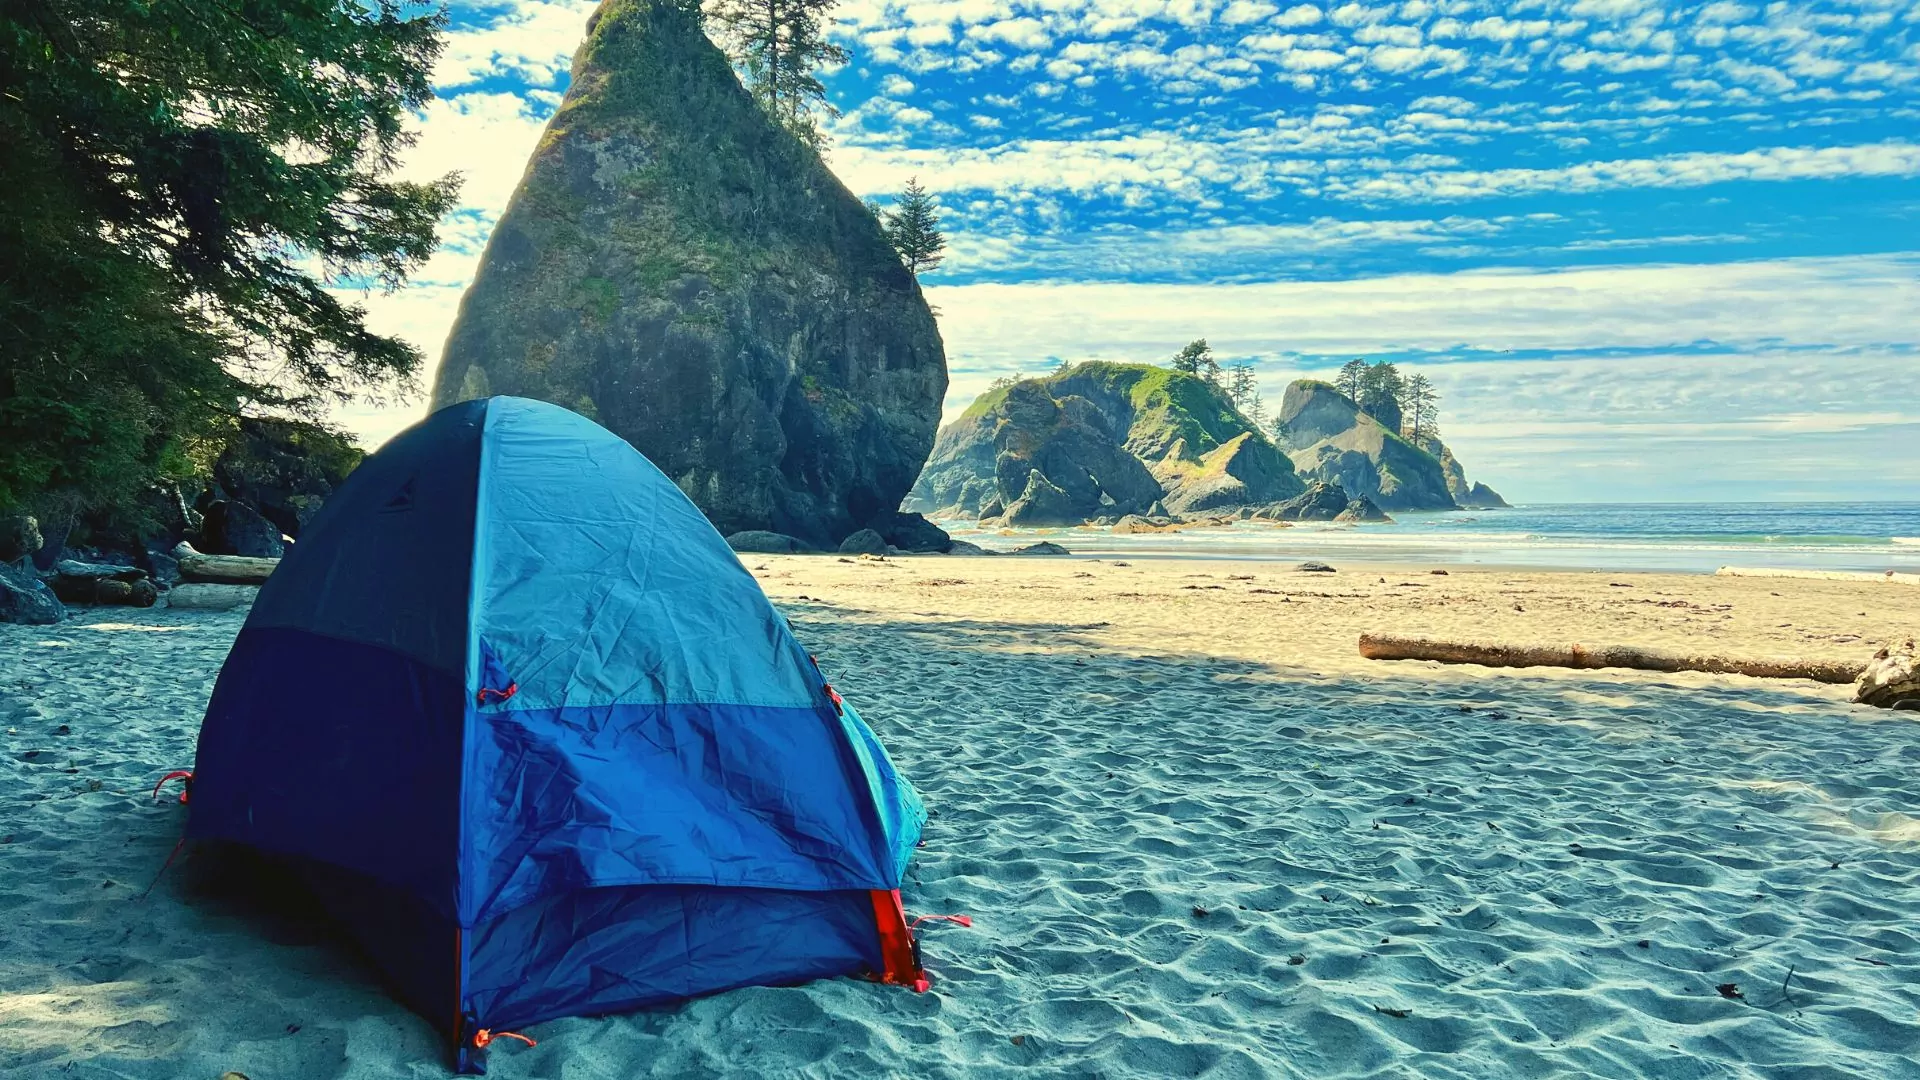 Tent sits on sandy beach while large fern-covered boulders jut out of the ocean behind